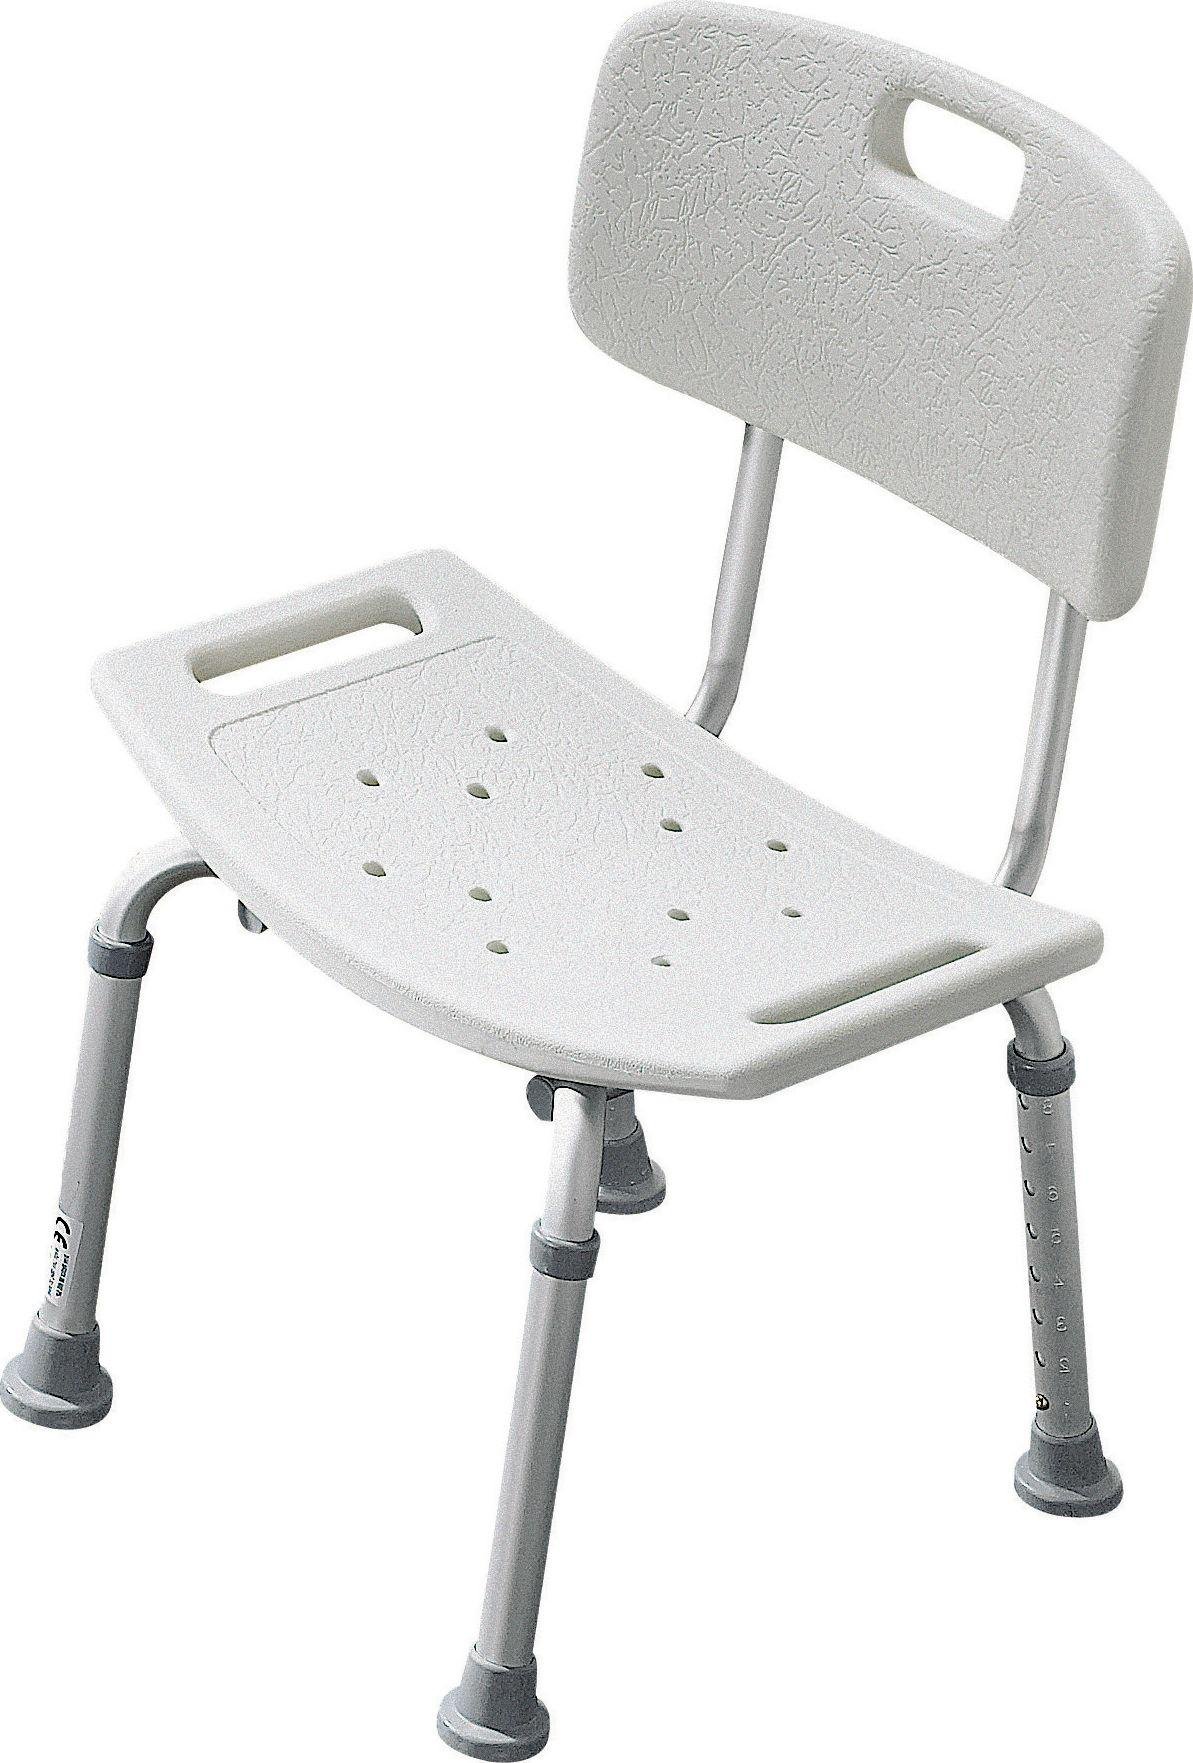 Shower Seat with Backrest